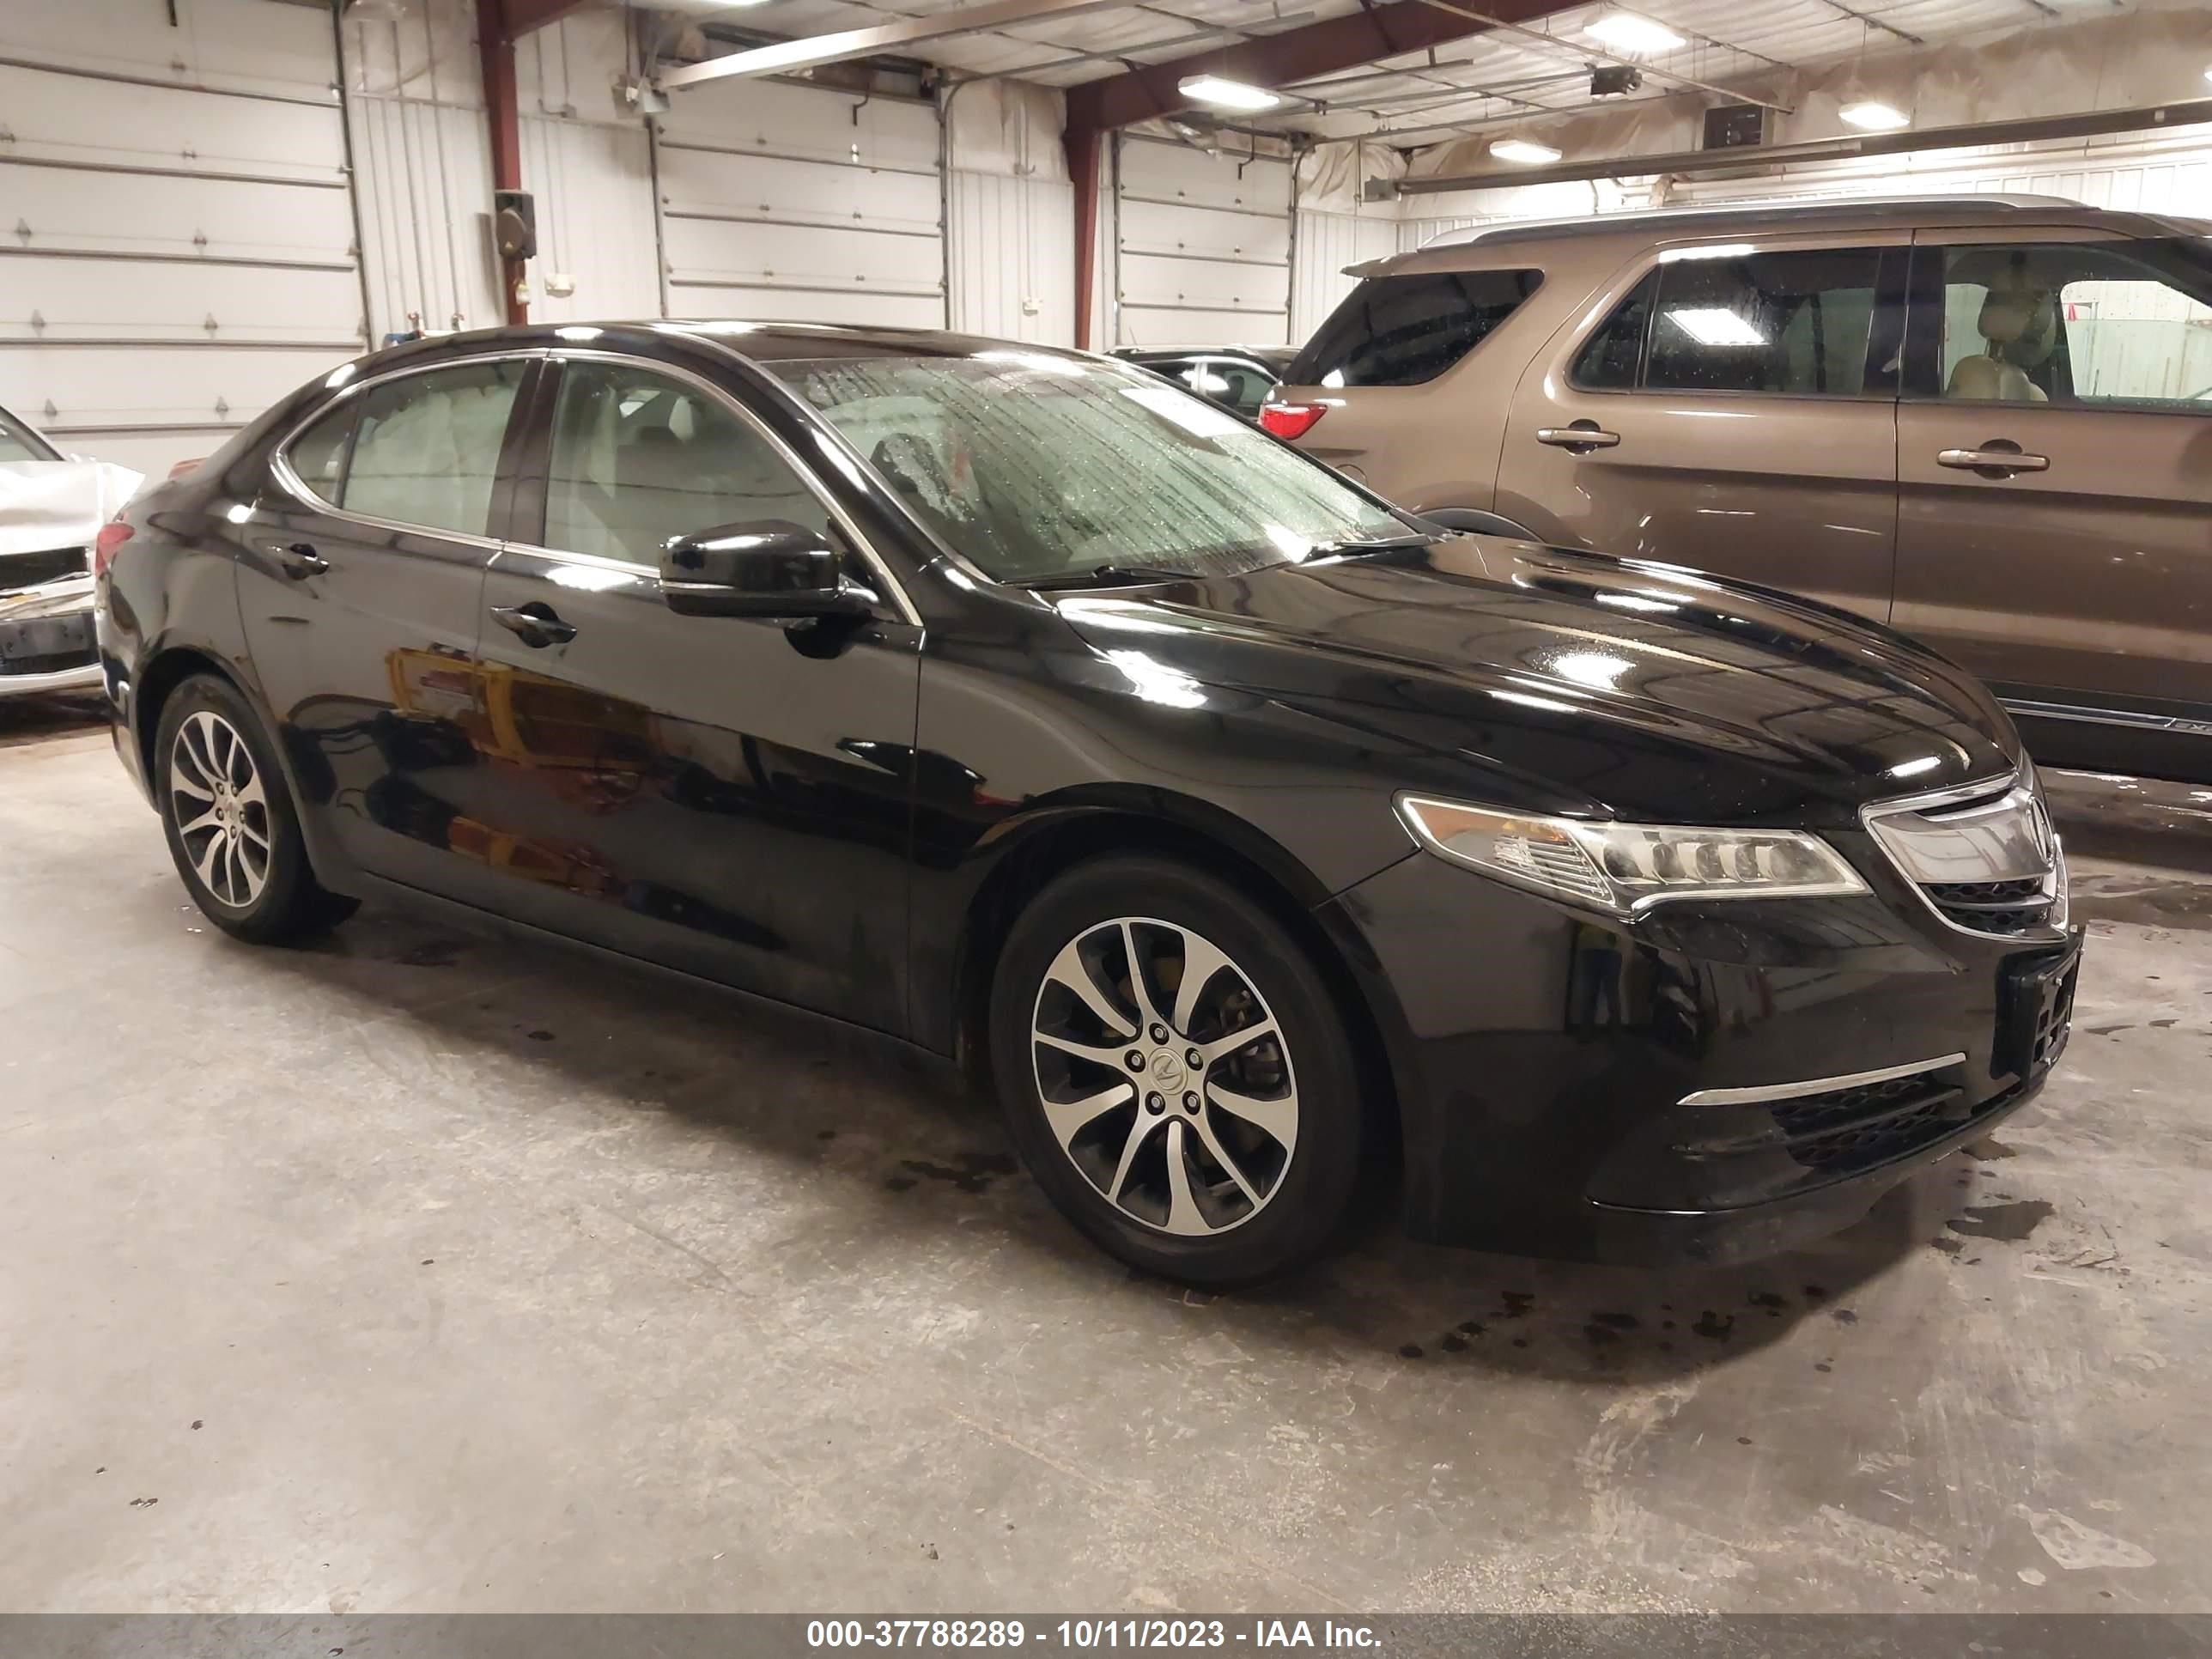 vin: 19UUB1F5XHA009560 19UUB1F5XHA009560 2017 acura tlx 2400 for Sale in 50069, 1000 Armstrong Dr, De Soto, USA